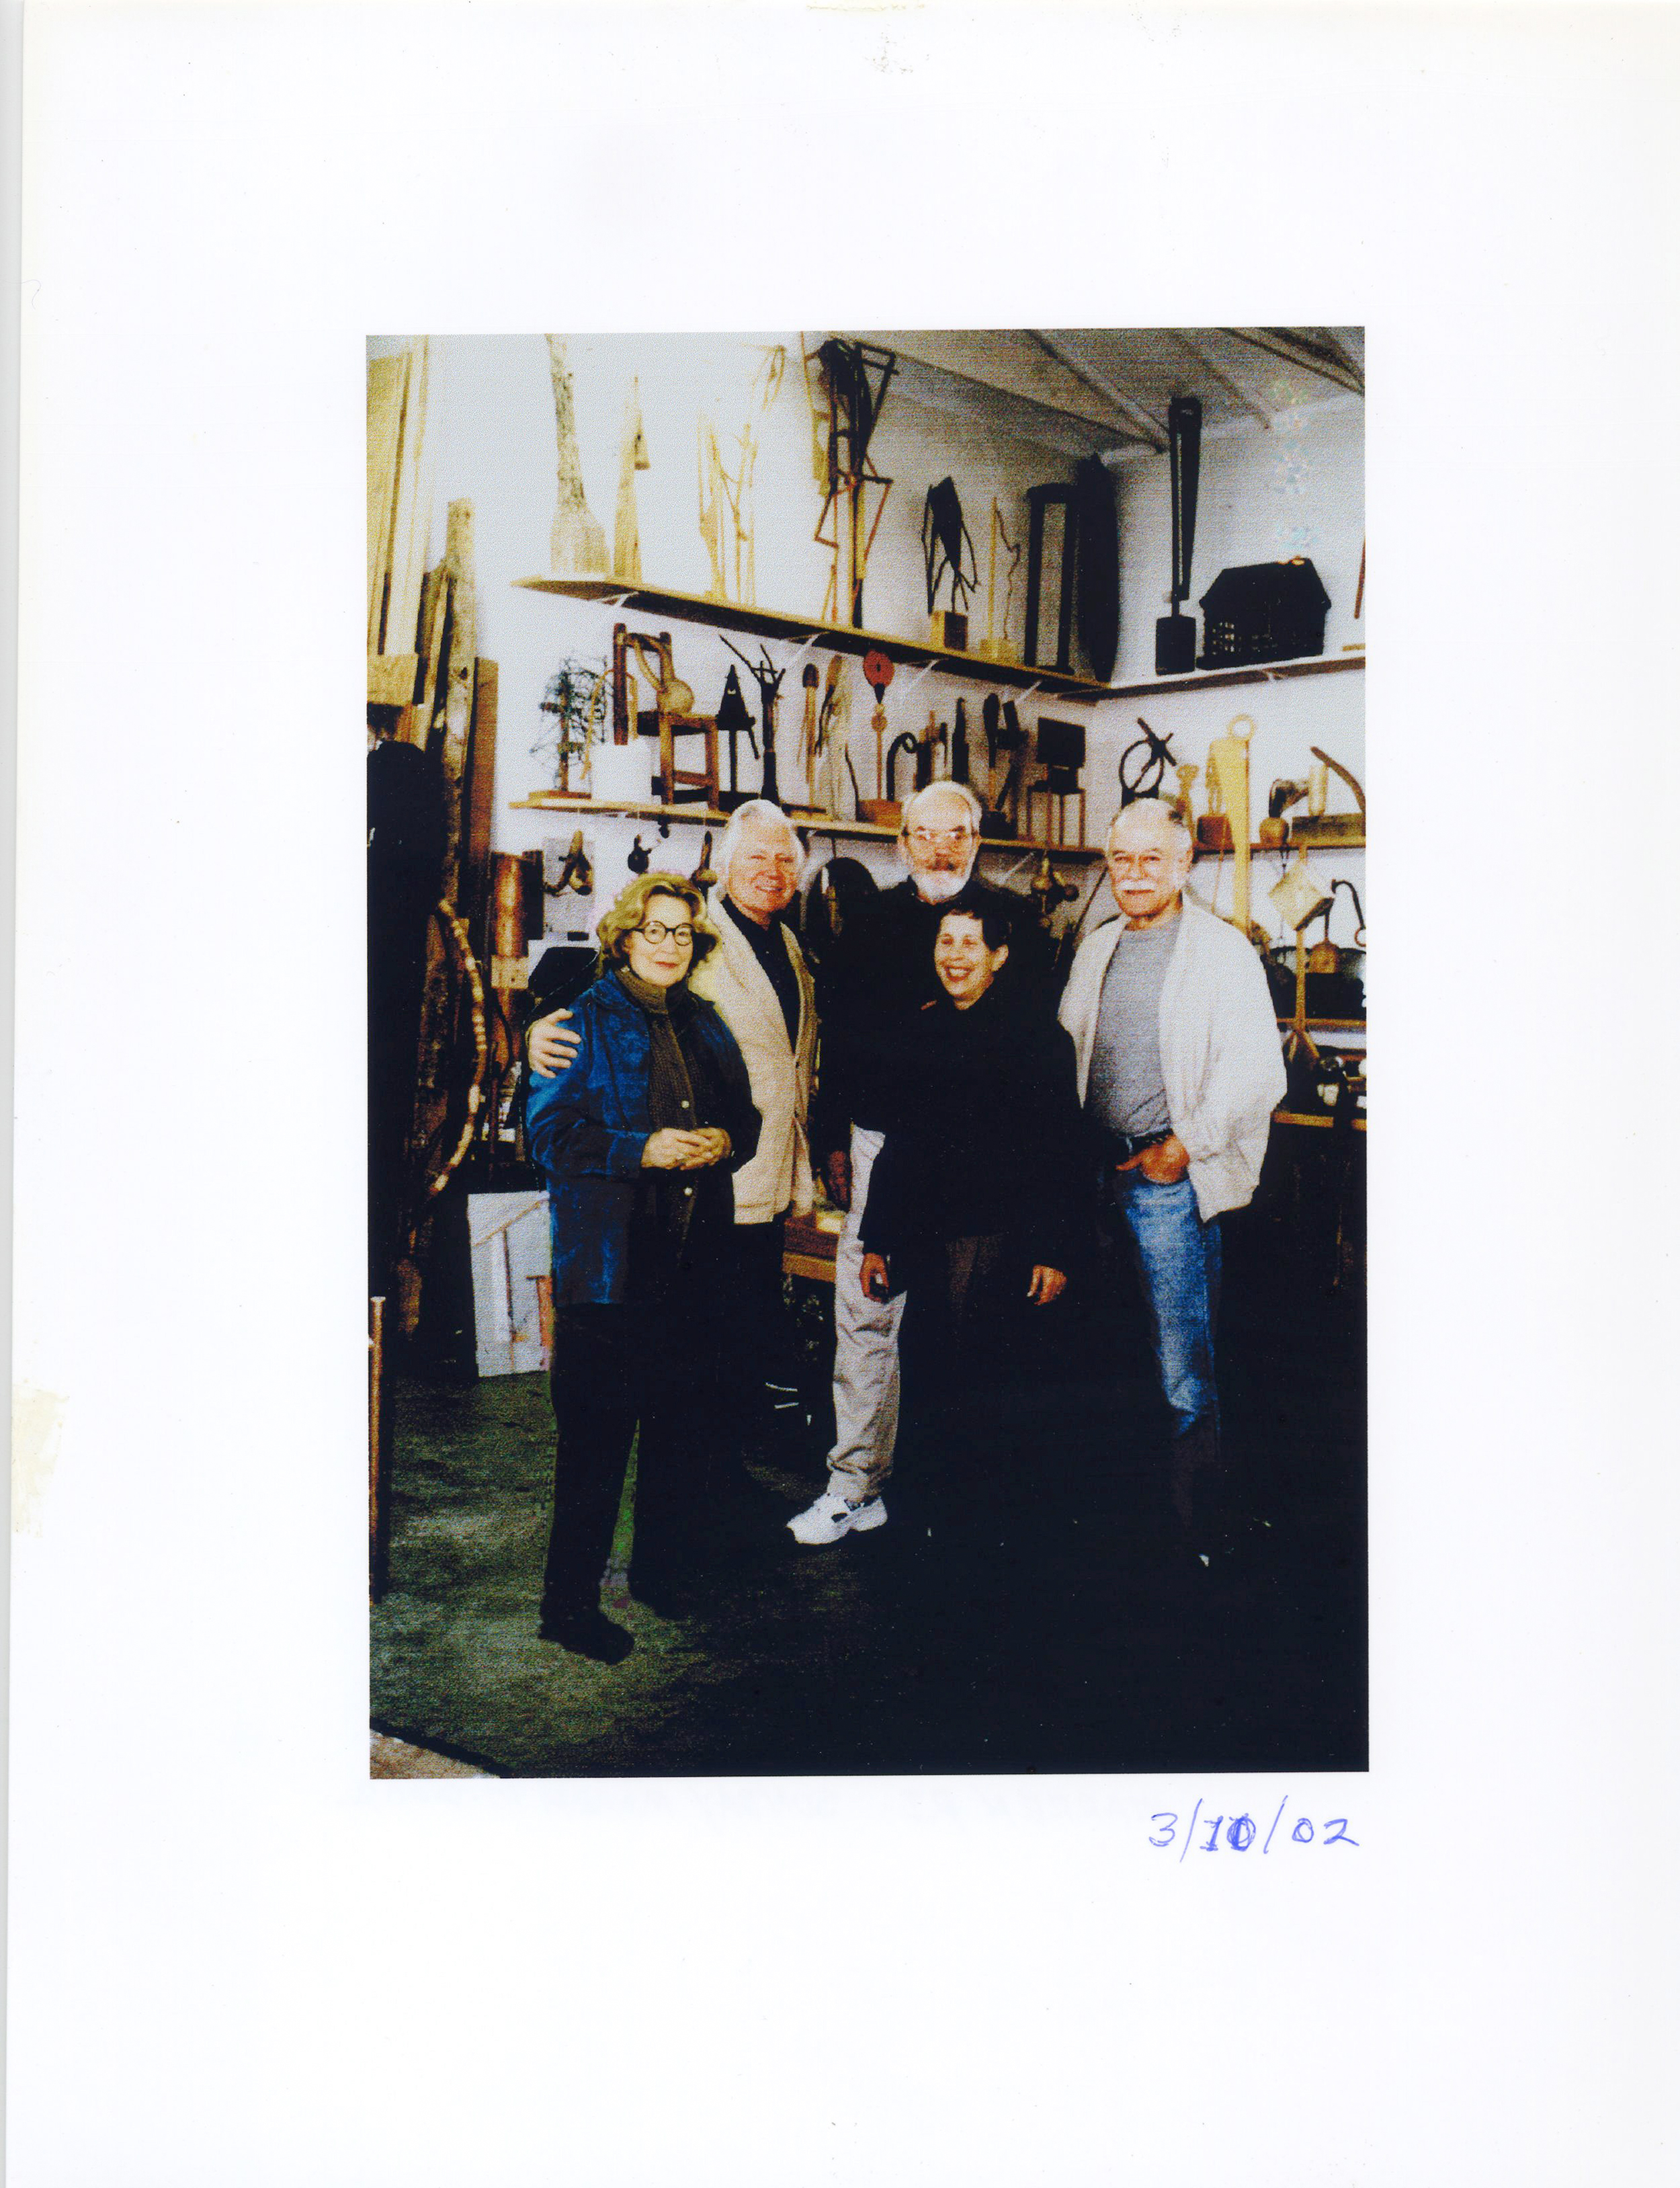   Friends and colleagues on a visit to JU's studio, 60 Croade St., Warren, RI. Left to right - Mary Townley, JU, Hugh Townley, Bunny Fain, and Jean Fain in the foreground.&nbsp;March 10, 2002  